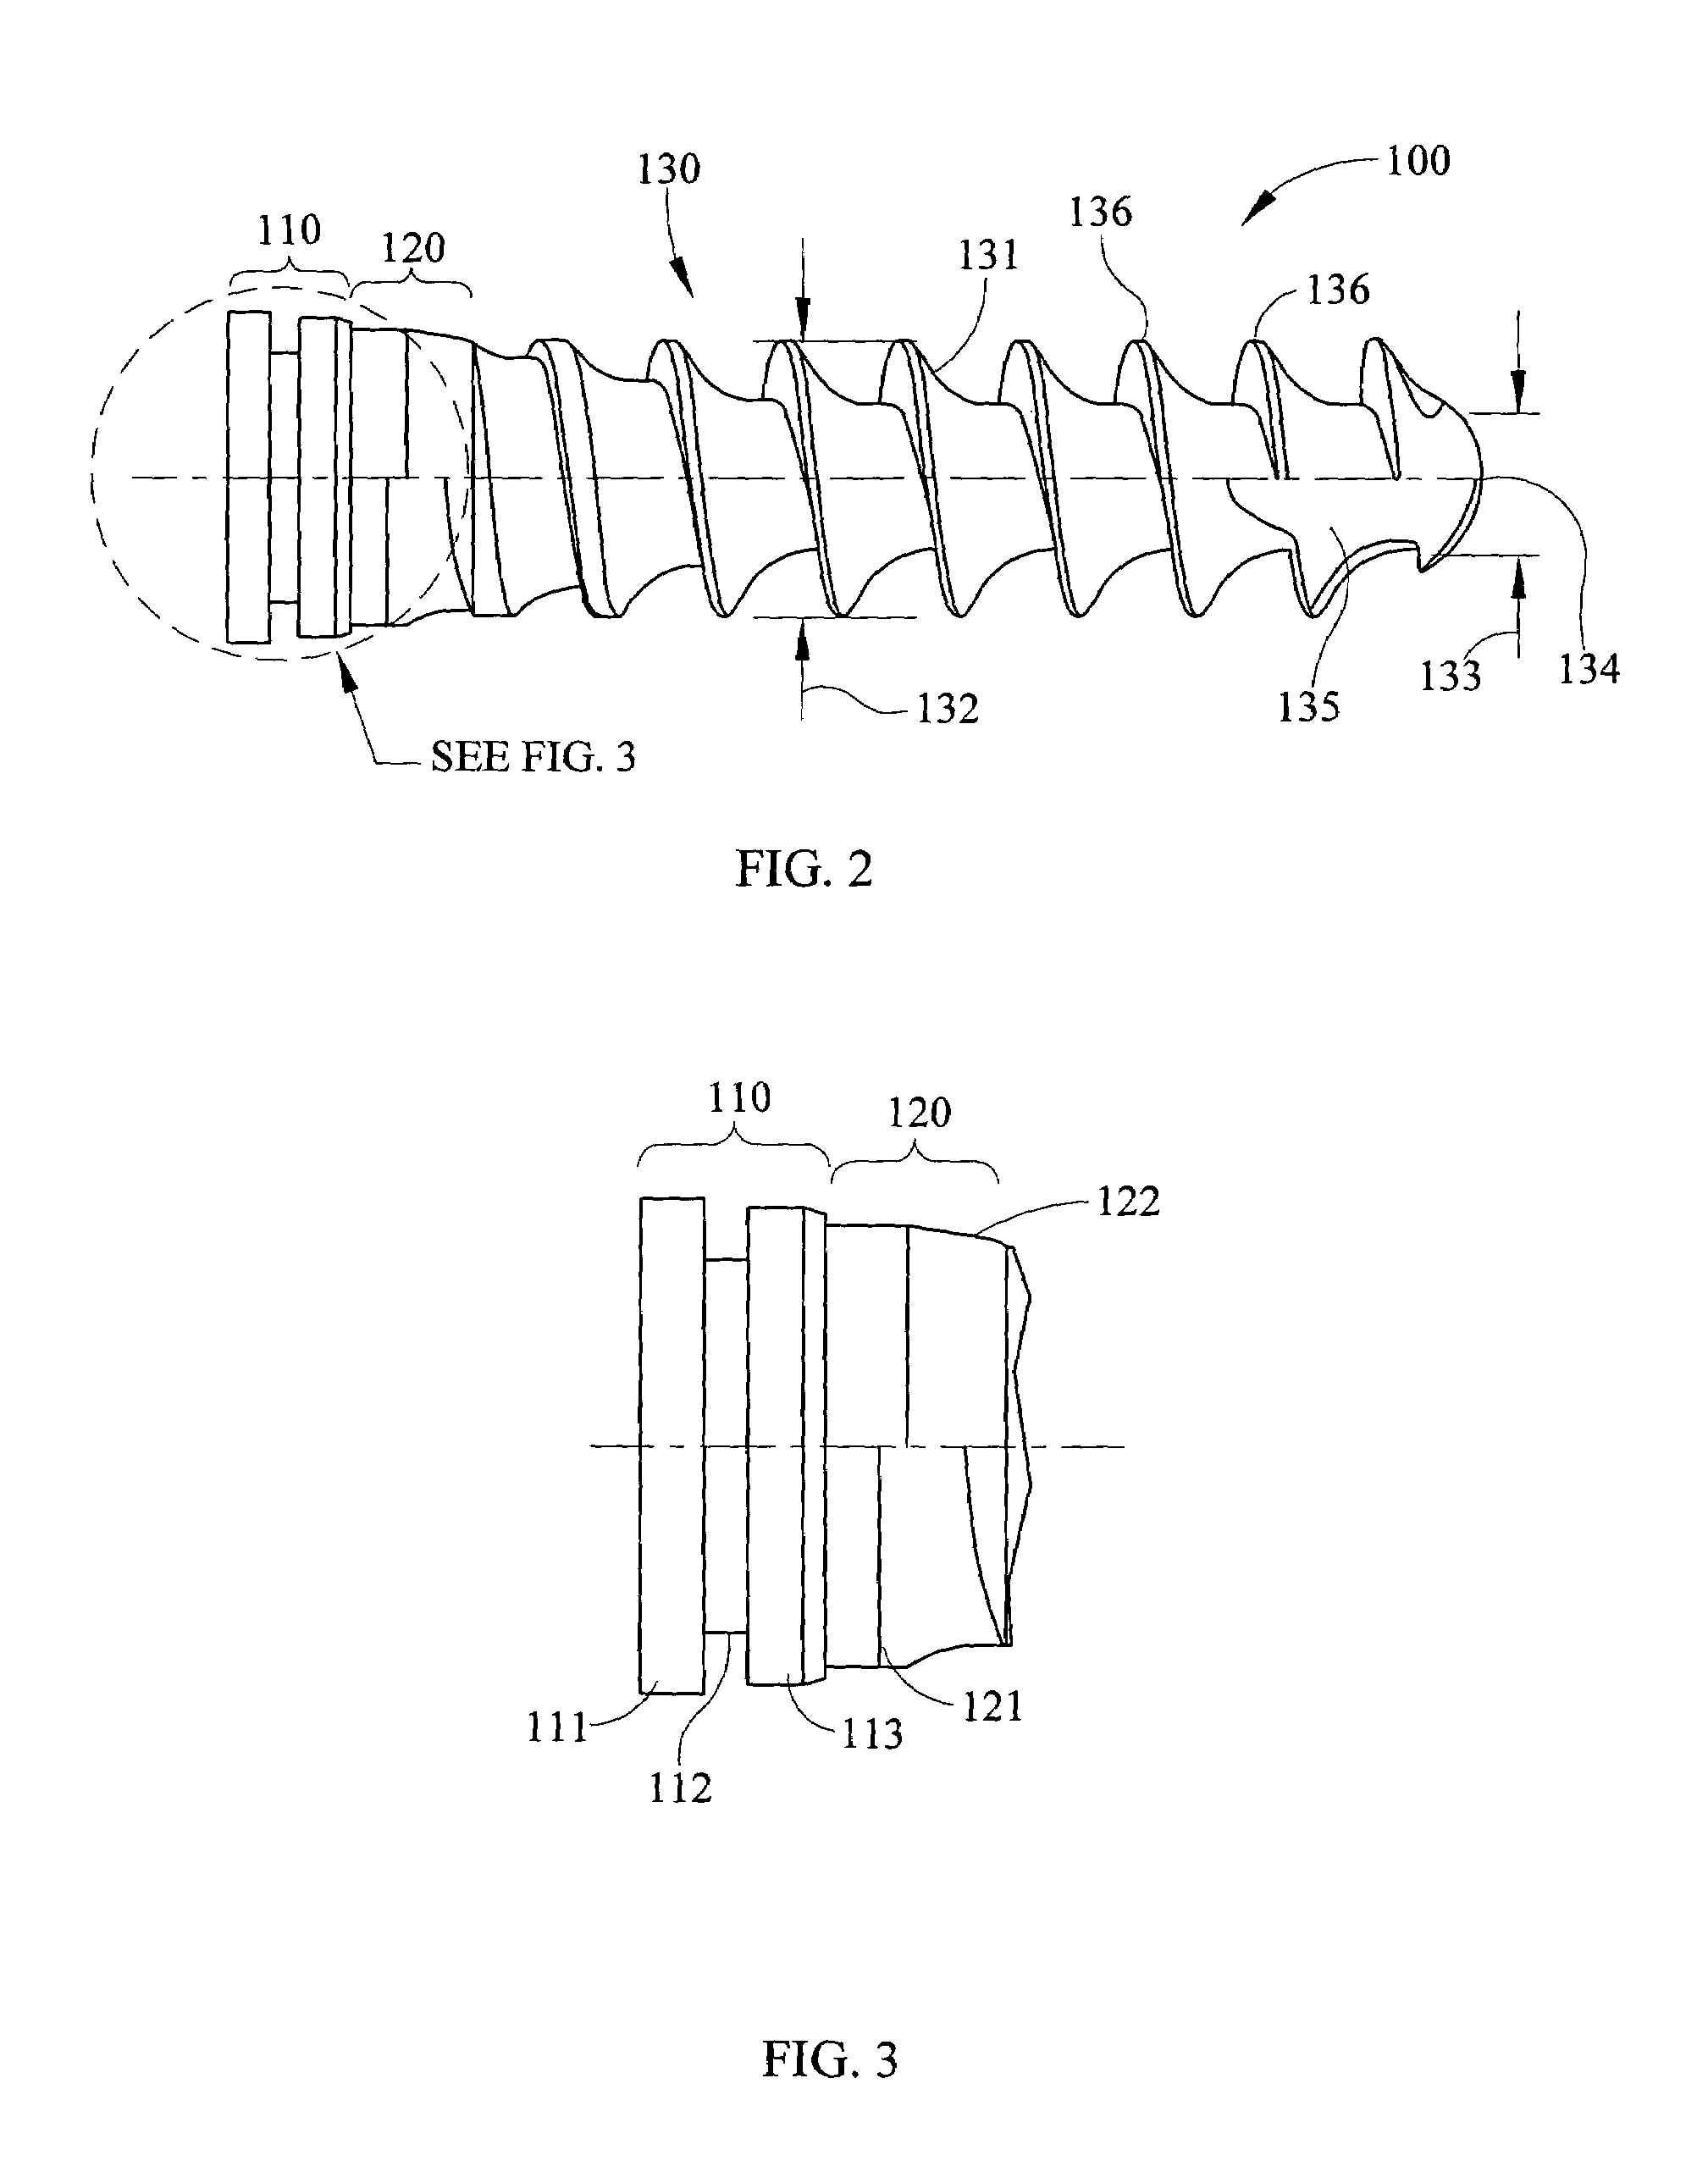 Fixed and variable locking fixation assembly